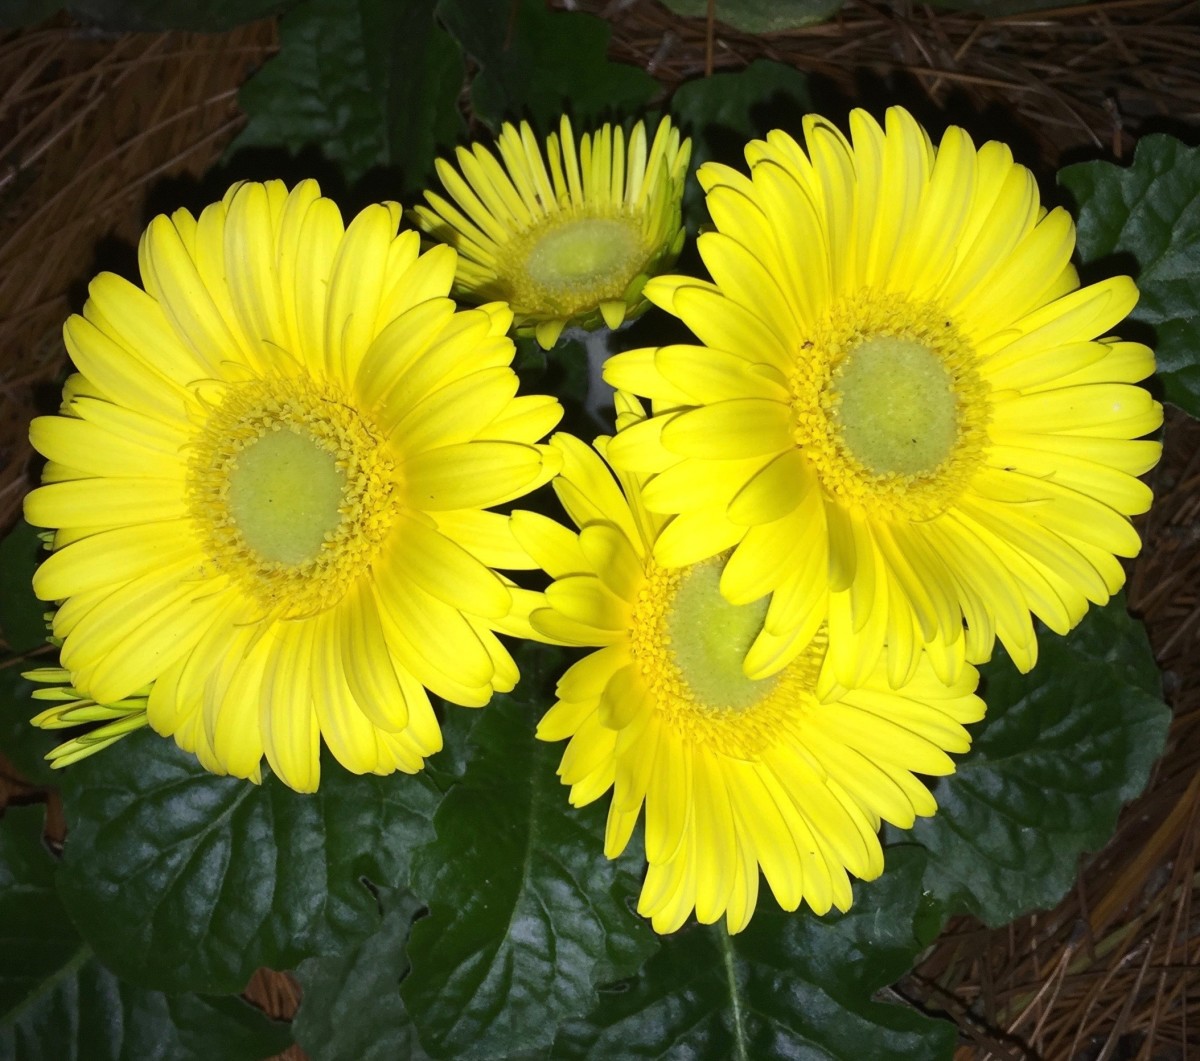 This cheerful yellow Gerbera is blooming its little heart out for me.